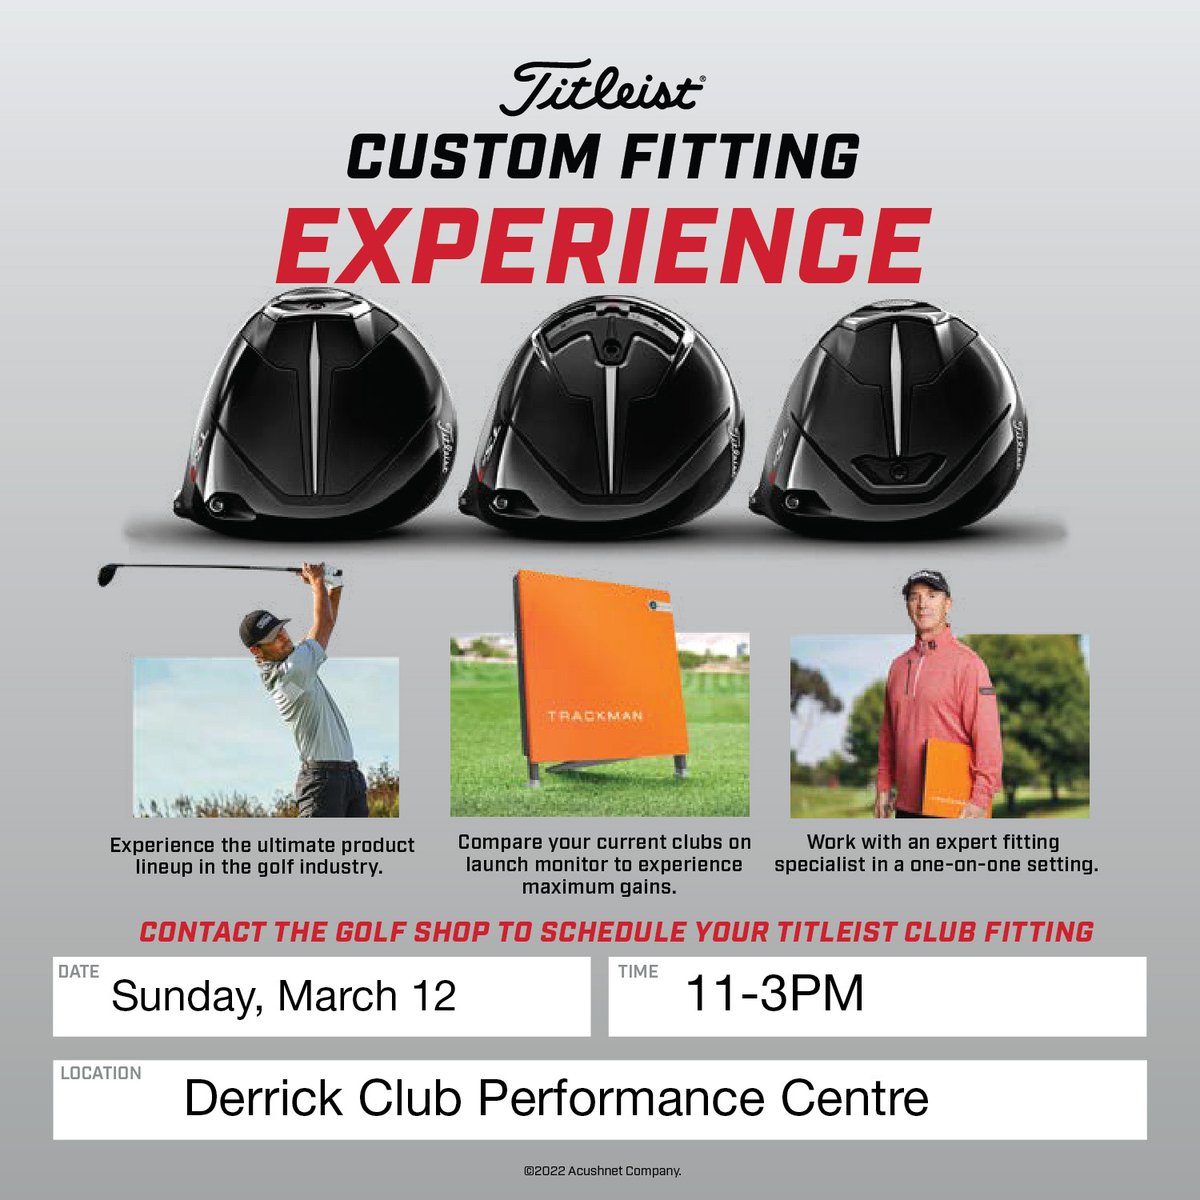 Contact the Pro Shop at 780.437.8383 to book your custom @Titleist fitting experience! 🏌️

Sunday, March 12
11AM - 3PM

#ProShop #ClubFitting #Titleist #FittingDay #Golf #YEGgolf #YEG